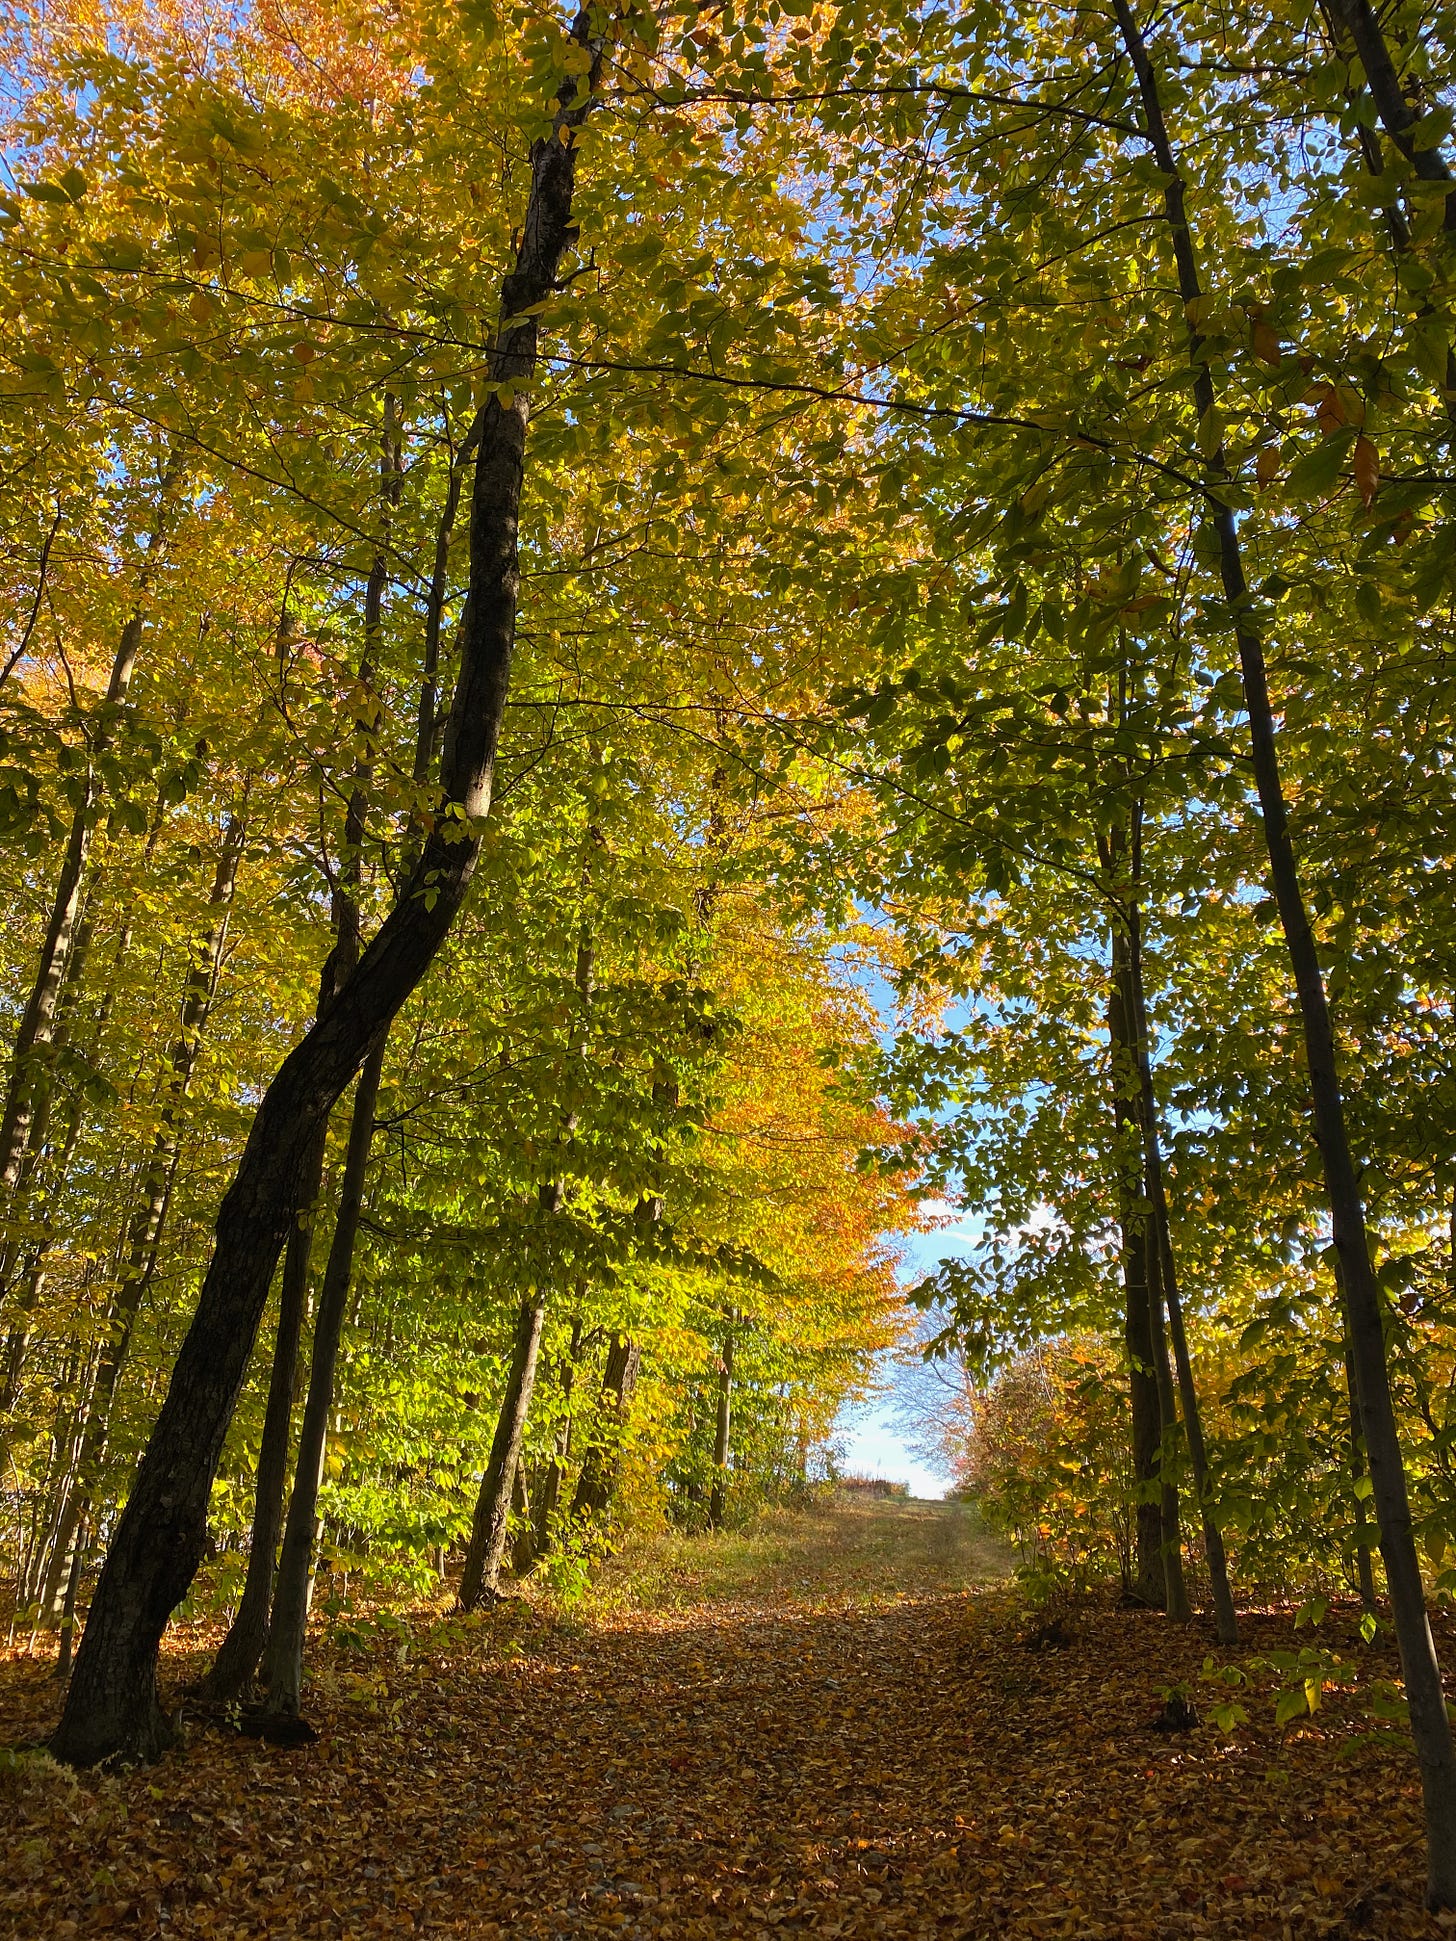 A wooded path, covered in brown leaves, winding between towering gold and green beech trees.